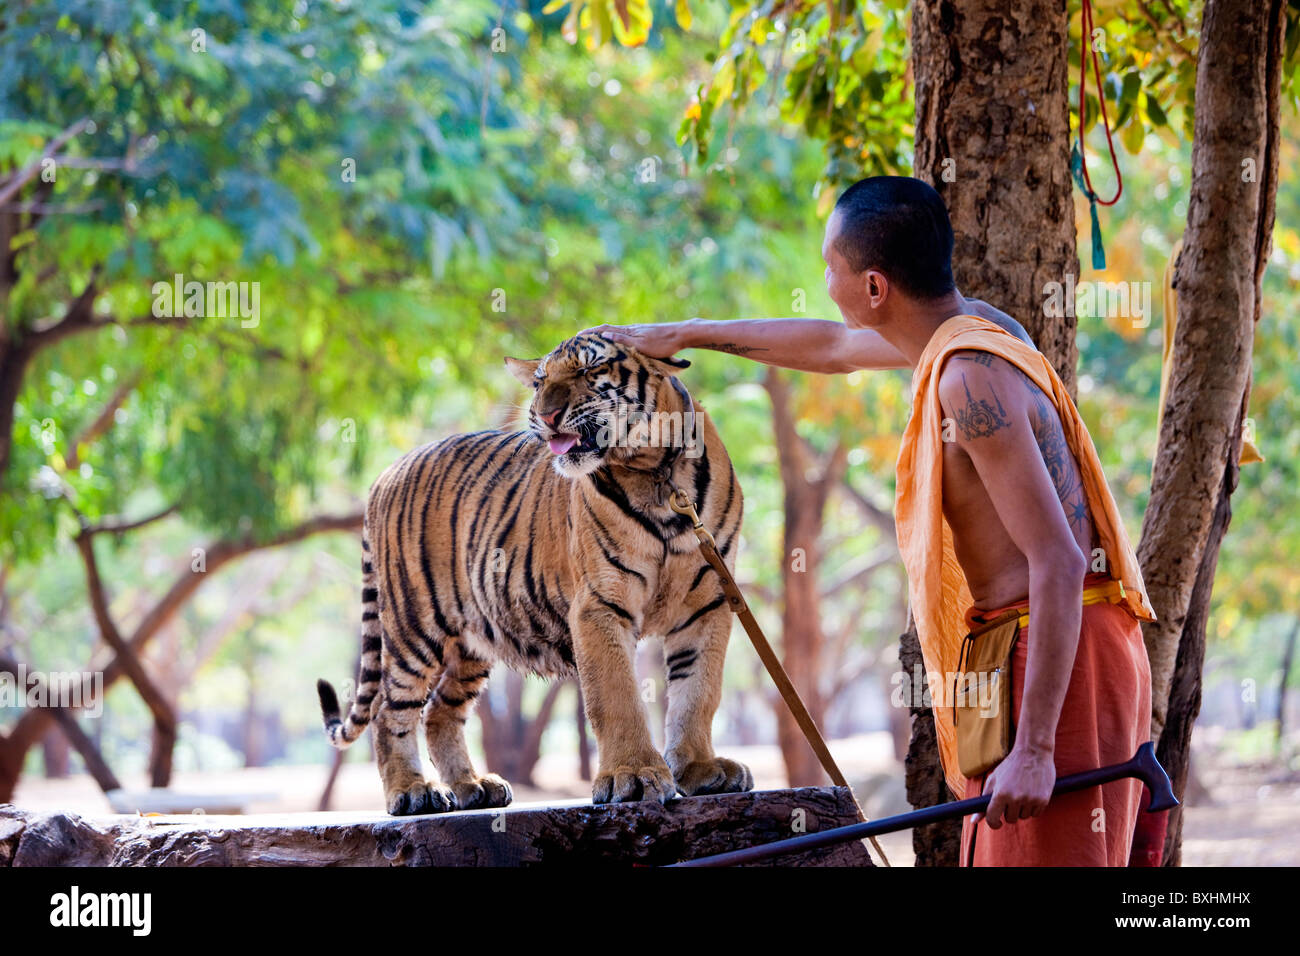 Buddhist monk with tiger, Indochinese tiger or Corbett's tiger (Panthera tigris corbetti), Thailand Stock Photo